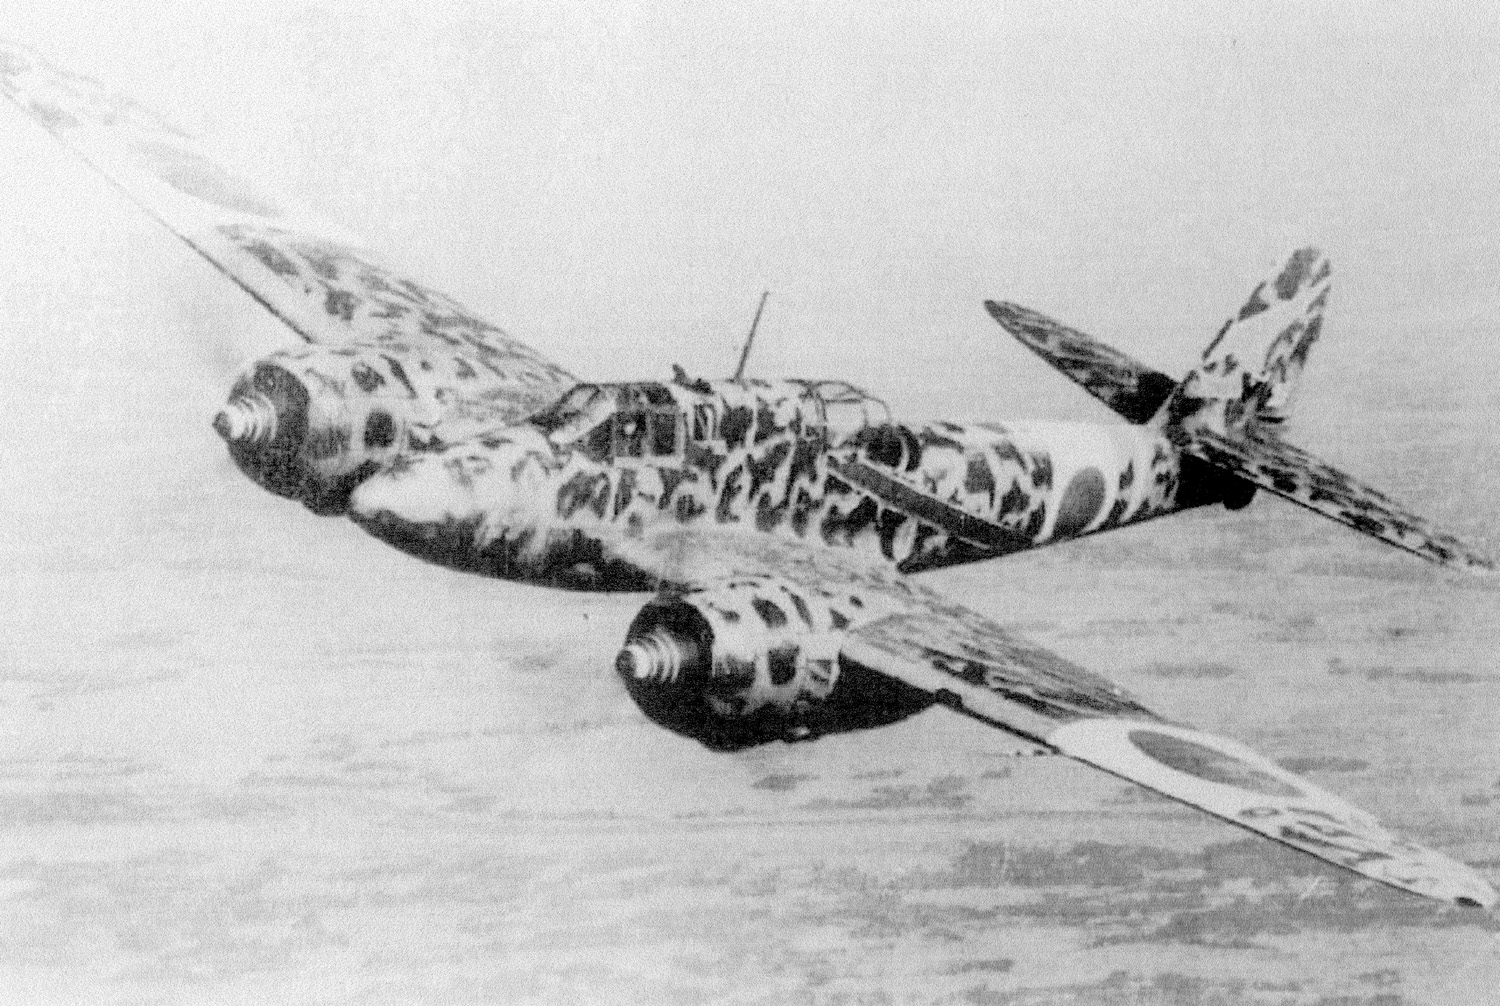 A Japanese twin-engine KI-45 Dragonslayer was known as “Nick” to the Allies.